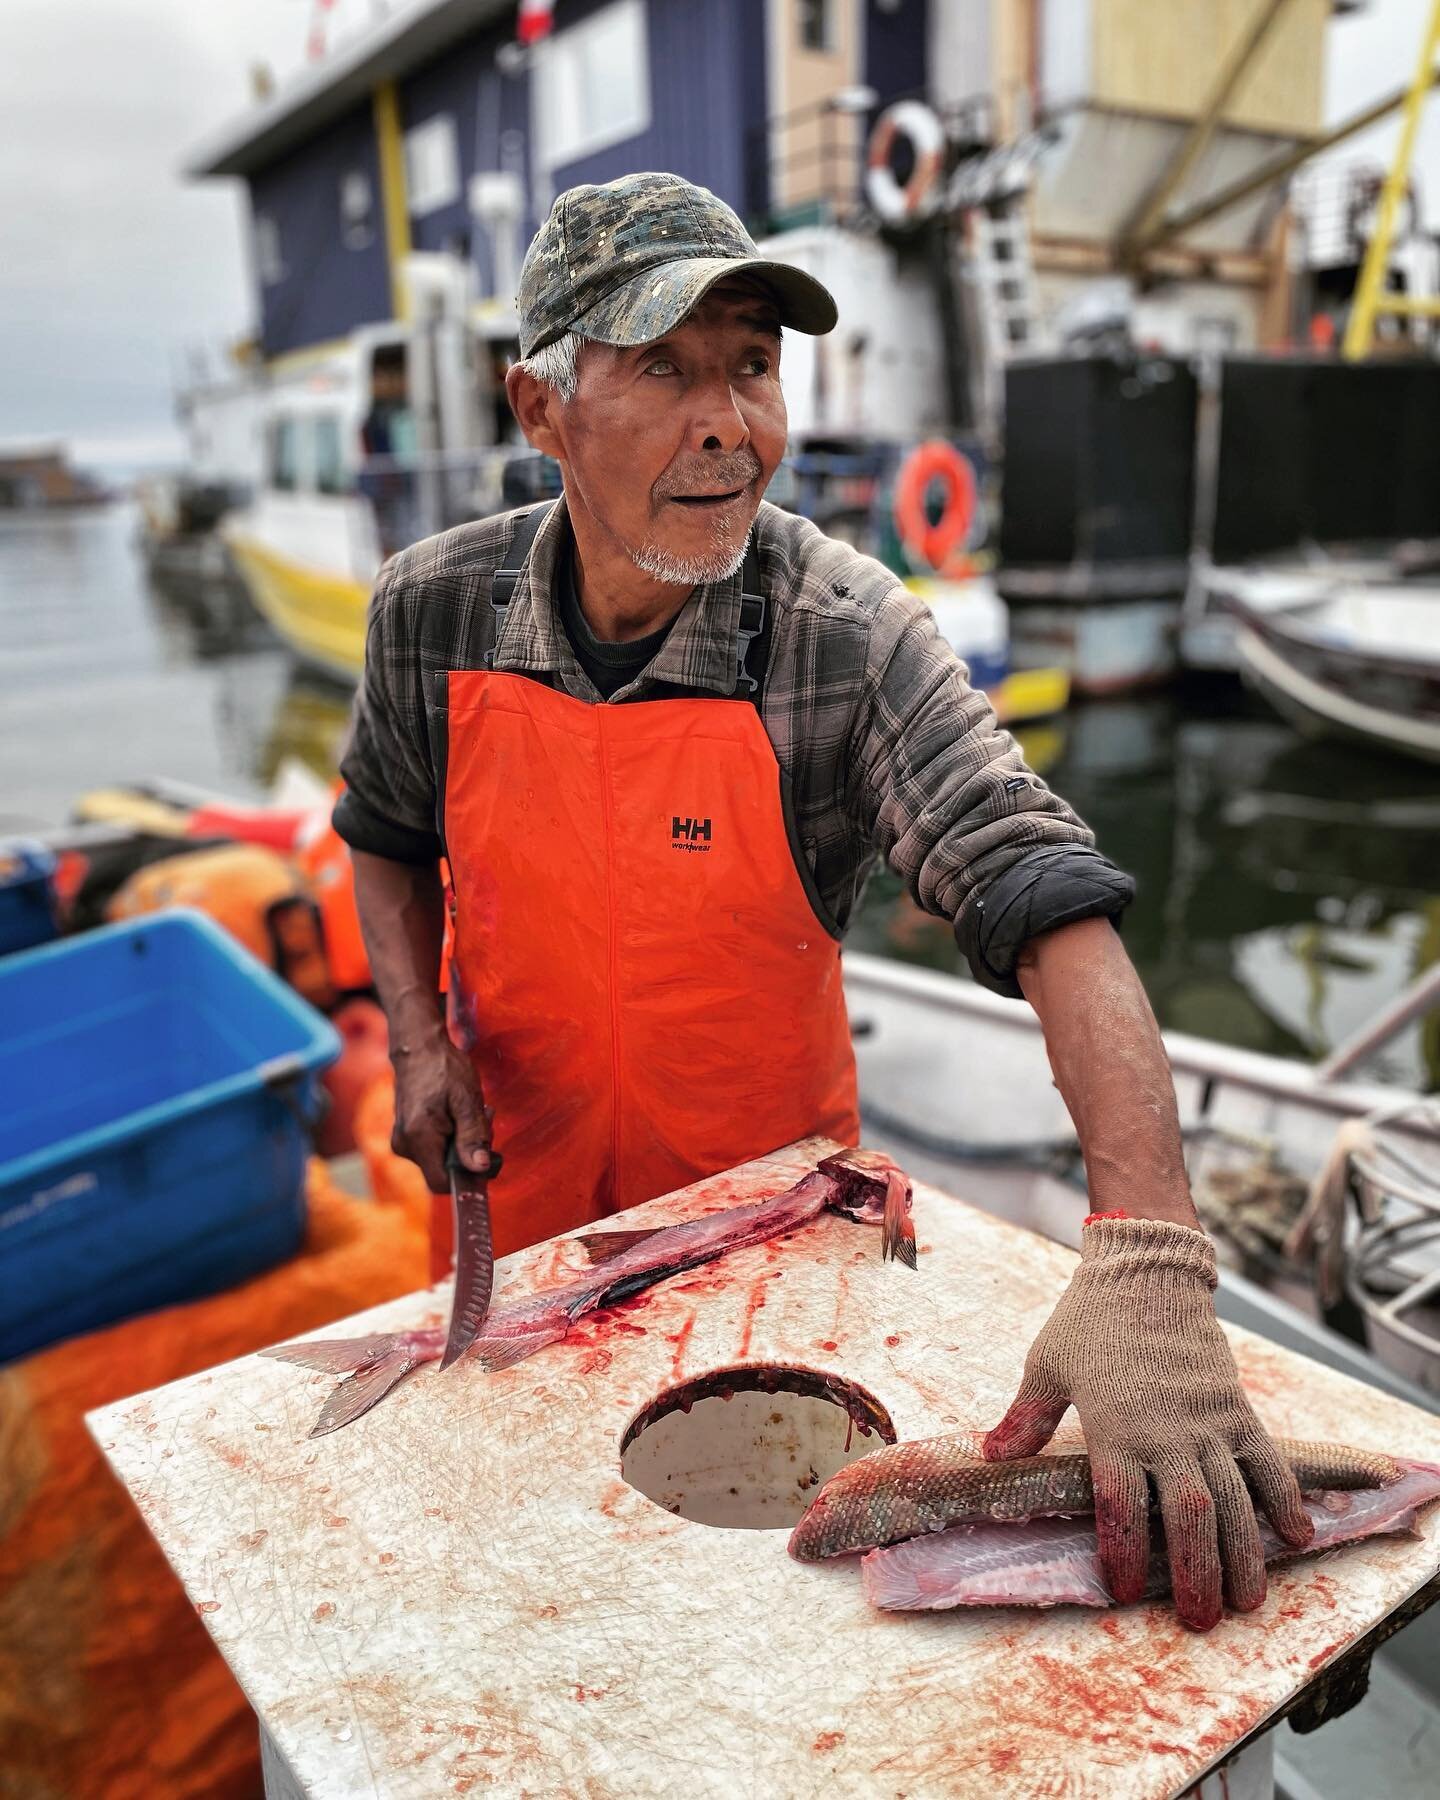 At the wharf Pete Enzoe is slapping down whitefish. Quick with his knife, down through the belly, out come the guts. Crunch, squish, slop while his dog, Wolf Rain, watches from a bed in the stern. He won&rsquo;t eat fish and so is bored. But the fish